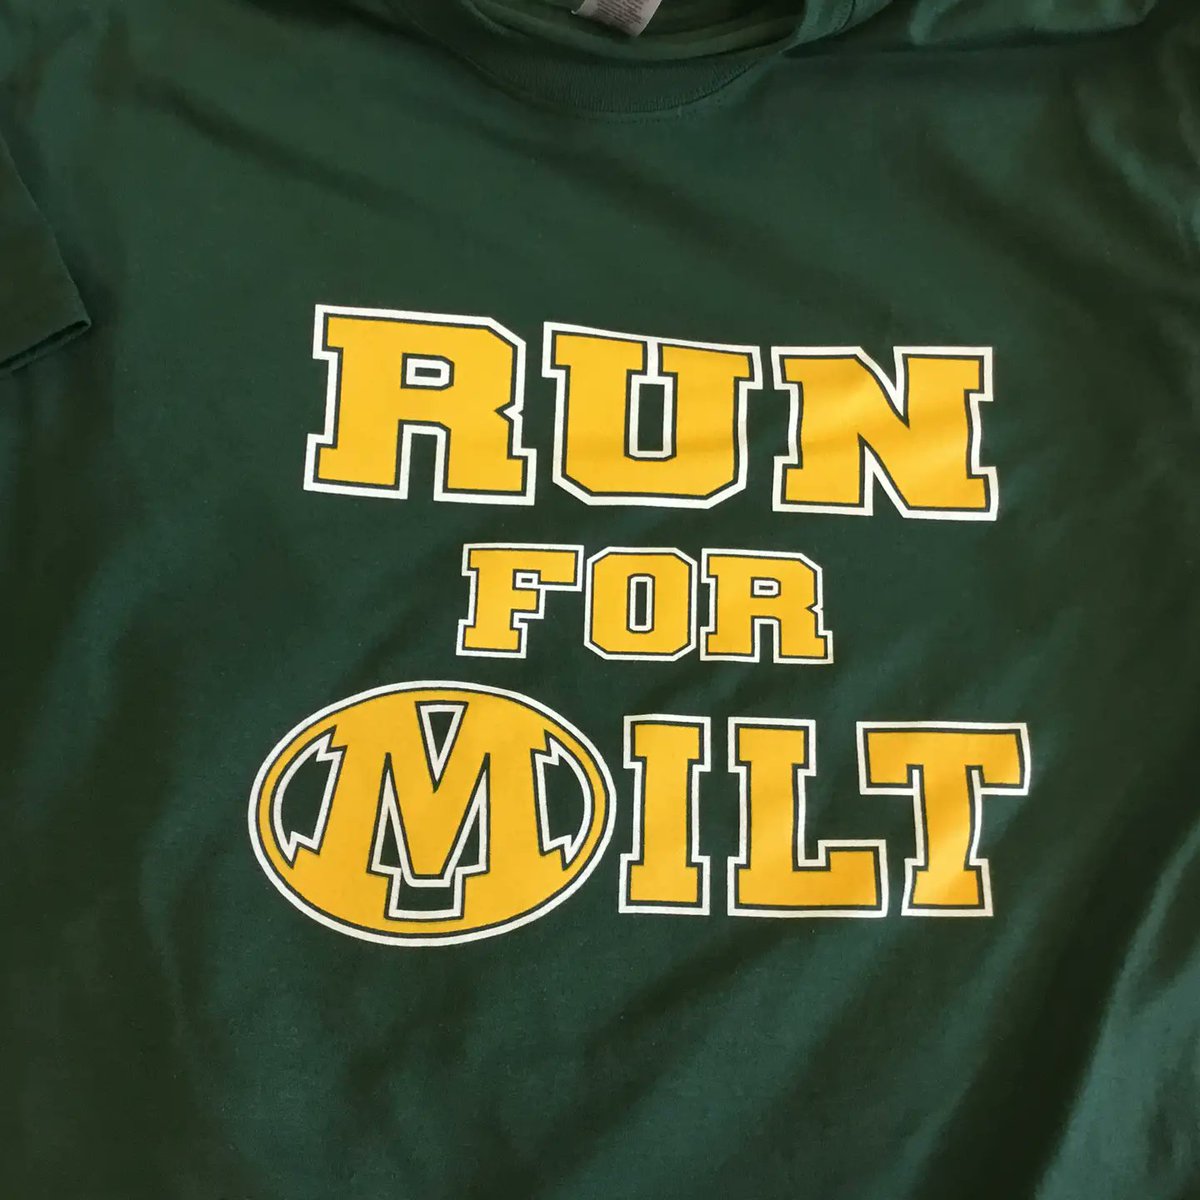 RIP Coach Milt. You are in our hearts @Medina_Cross and @medinaathletics during this difficult time. #RunForMilt #crosscountryrunning